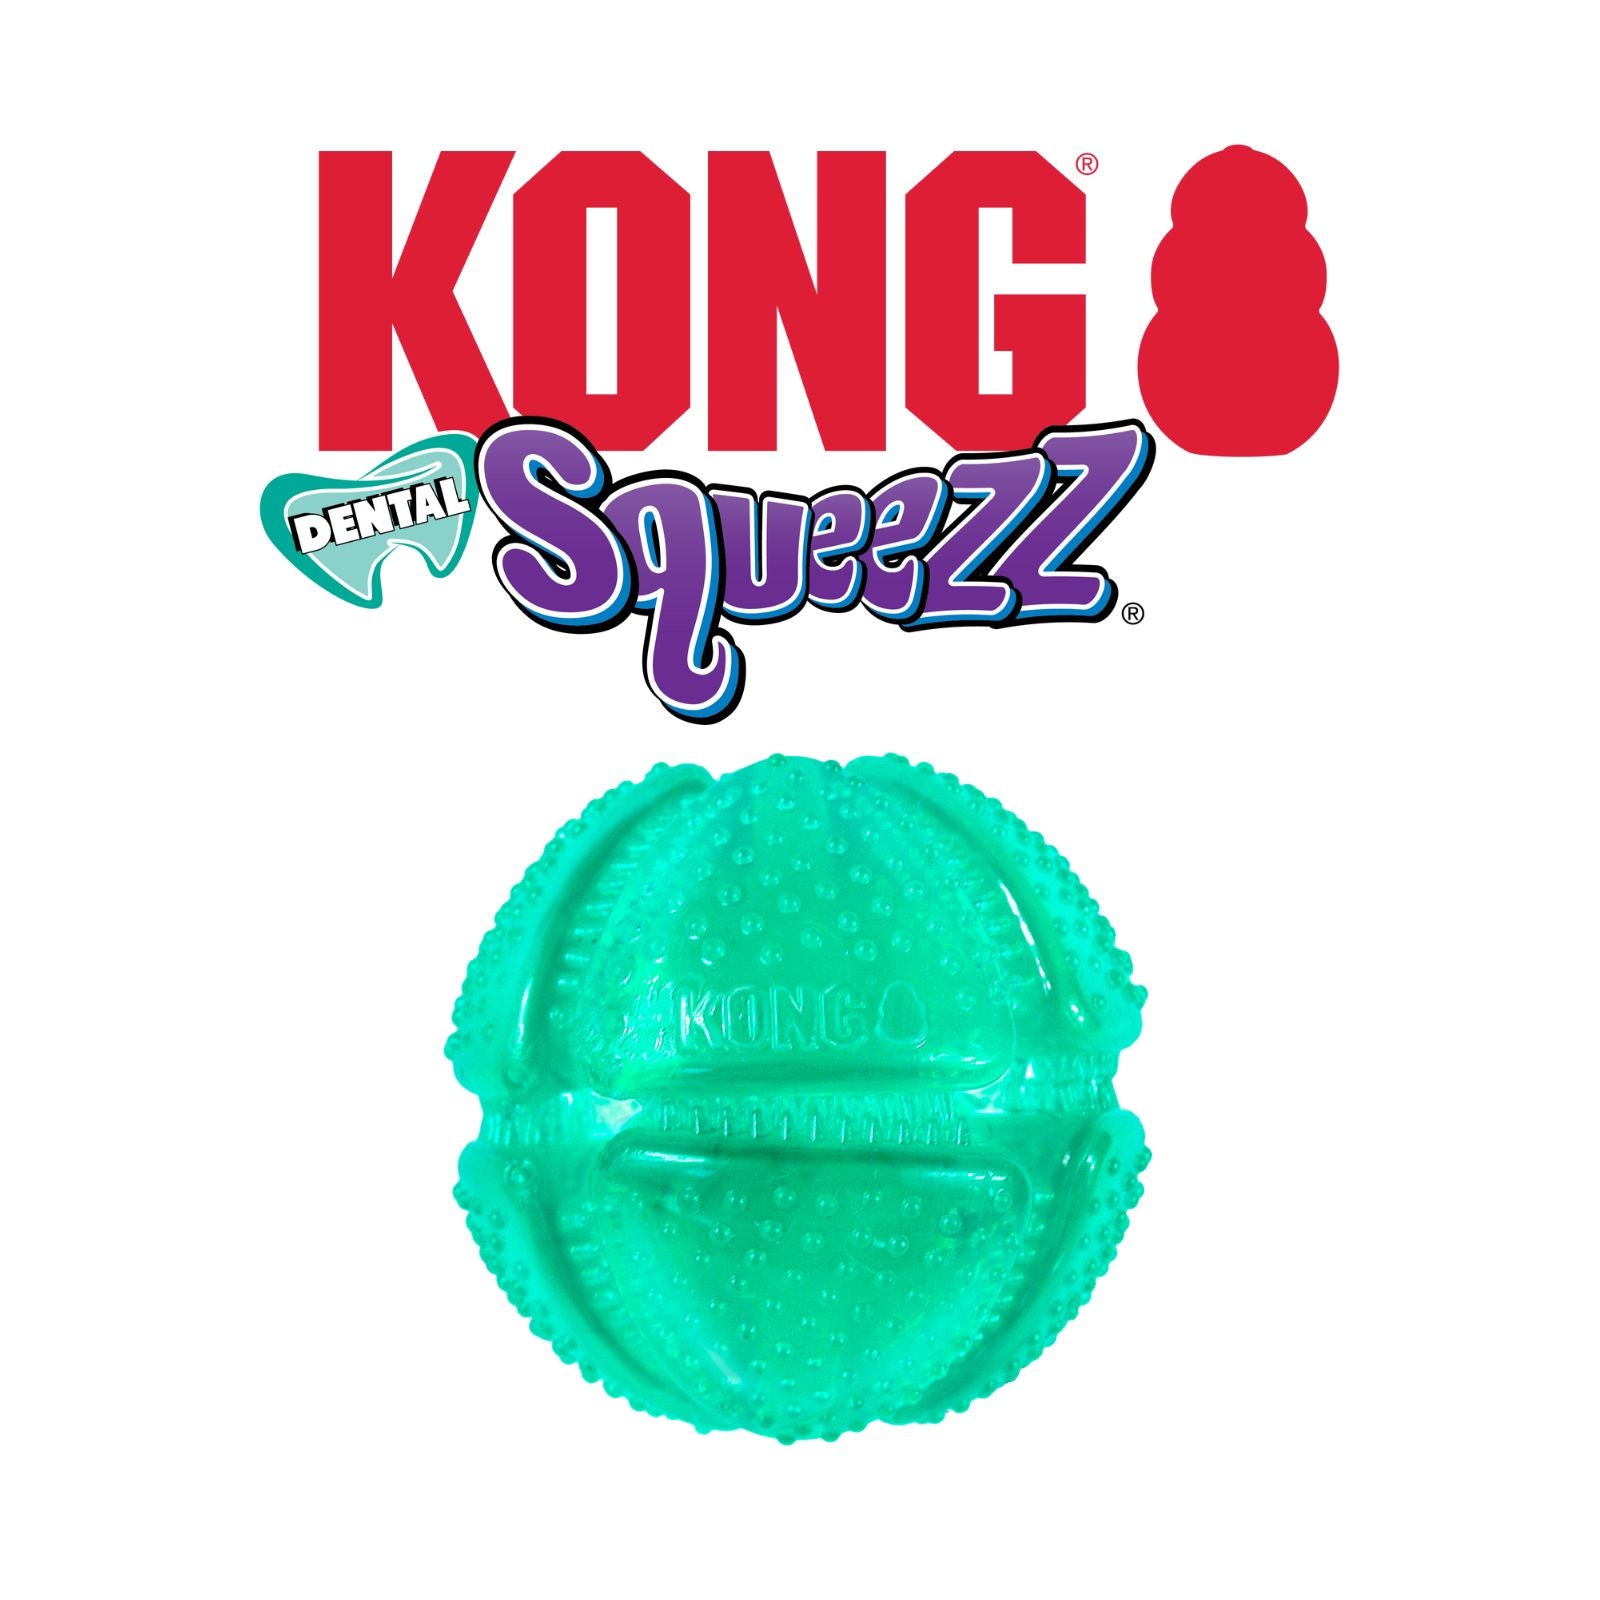 KONG Squeezz Dental Ball Chew Toy for Dogs